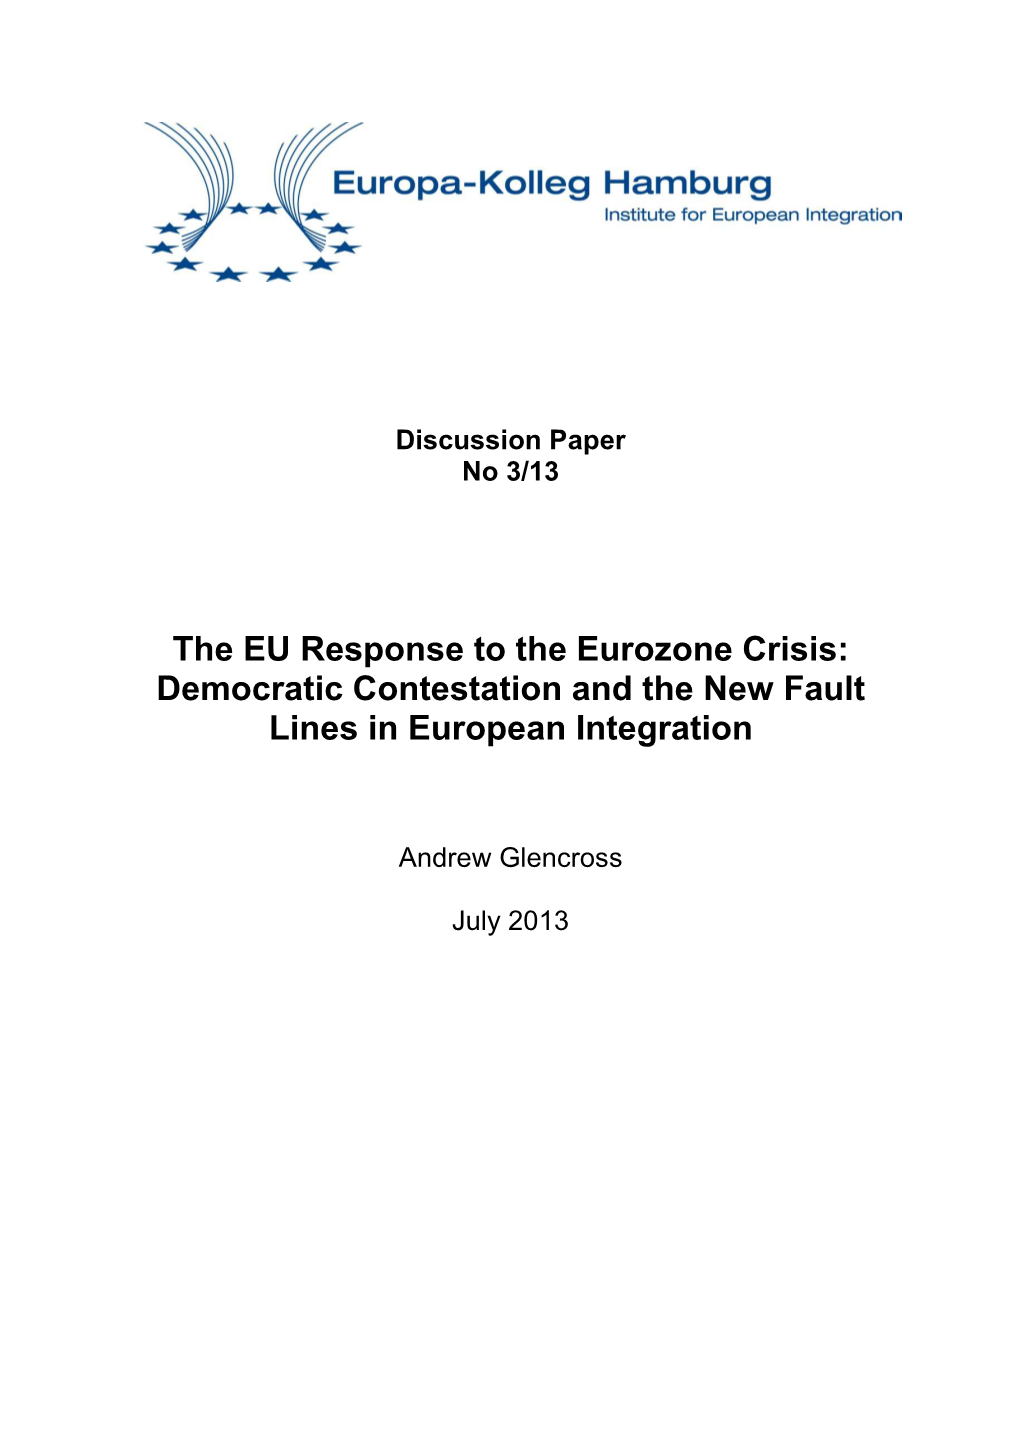 The EU Response to the Eurozone Crisis: Democratic Contestation and the New Fault Lines in European Integration